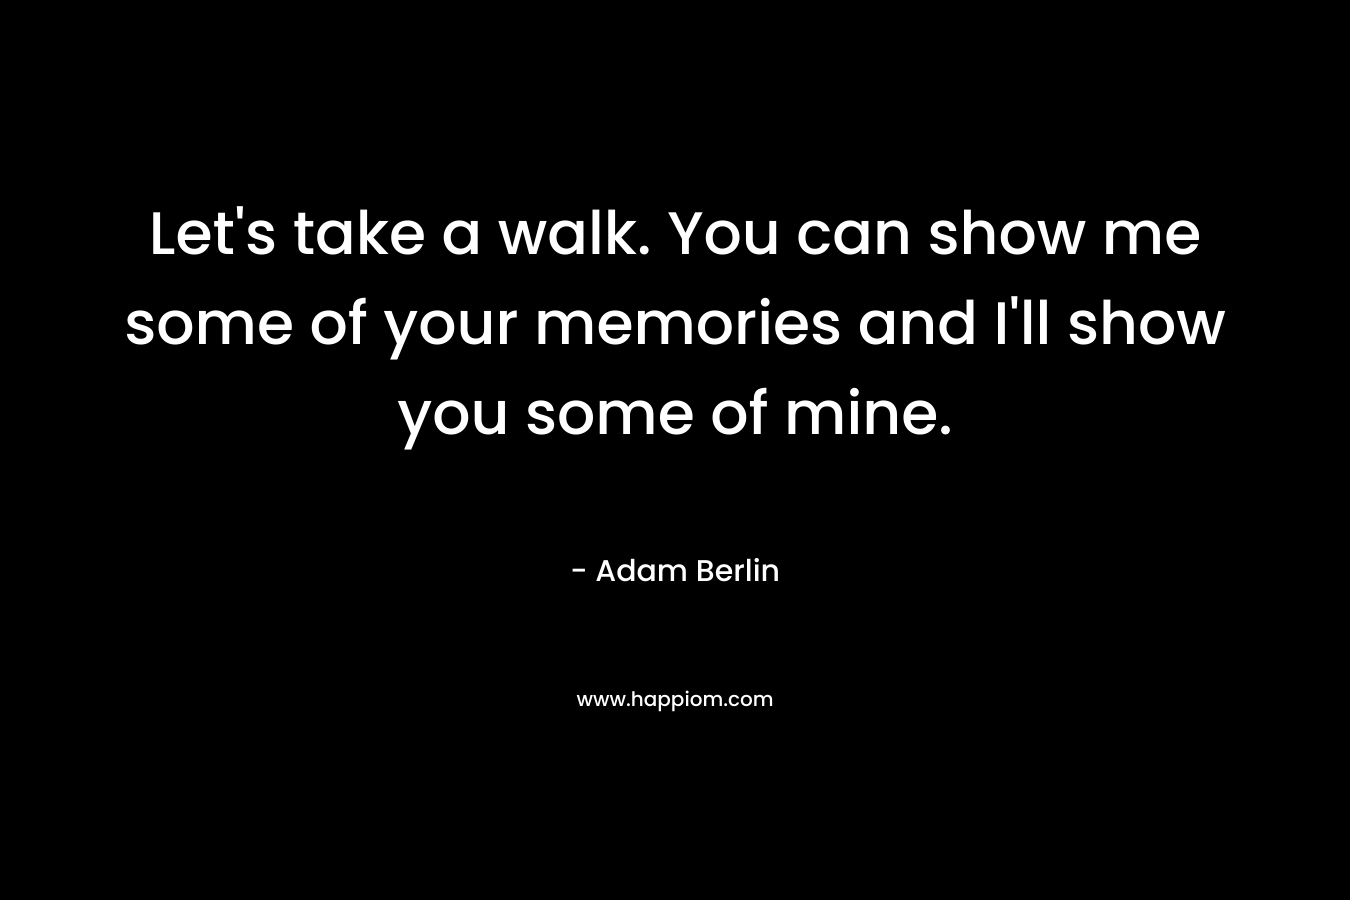 Let’s take a walk. You can show me some of your memories and I’ll show you some of mine. – Adam Berlin